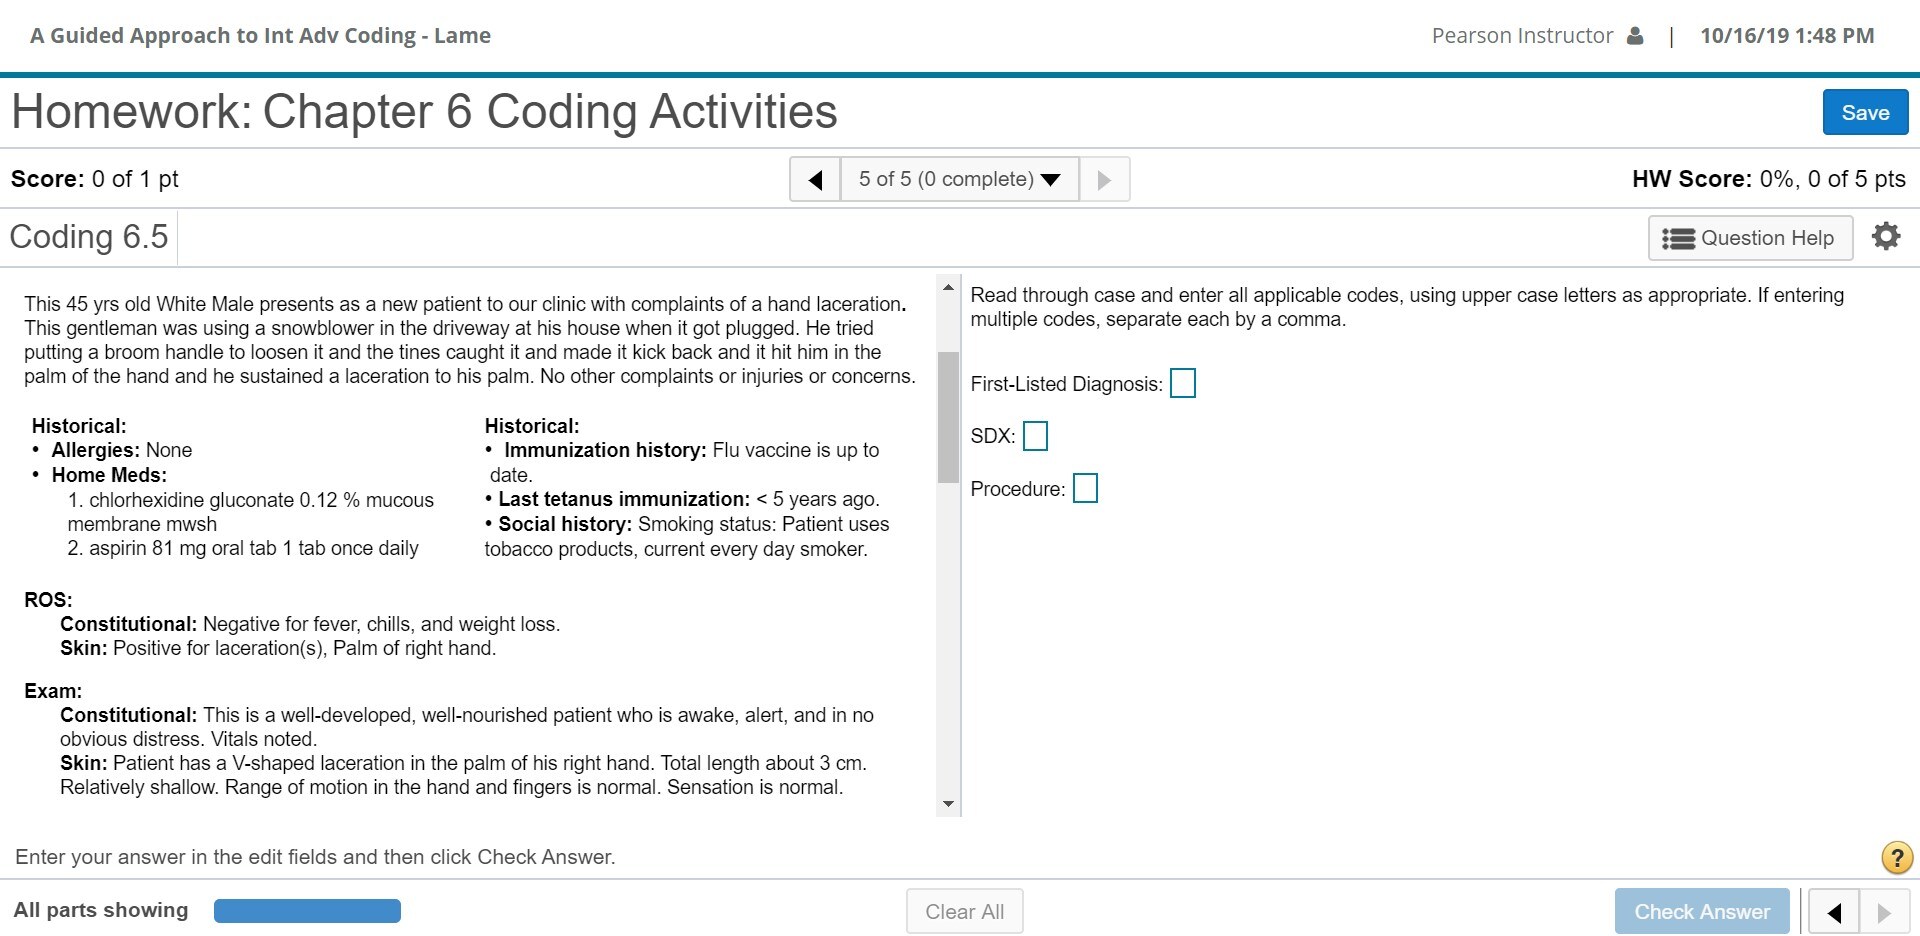 Assignments and Coding Activities